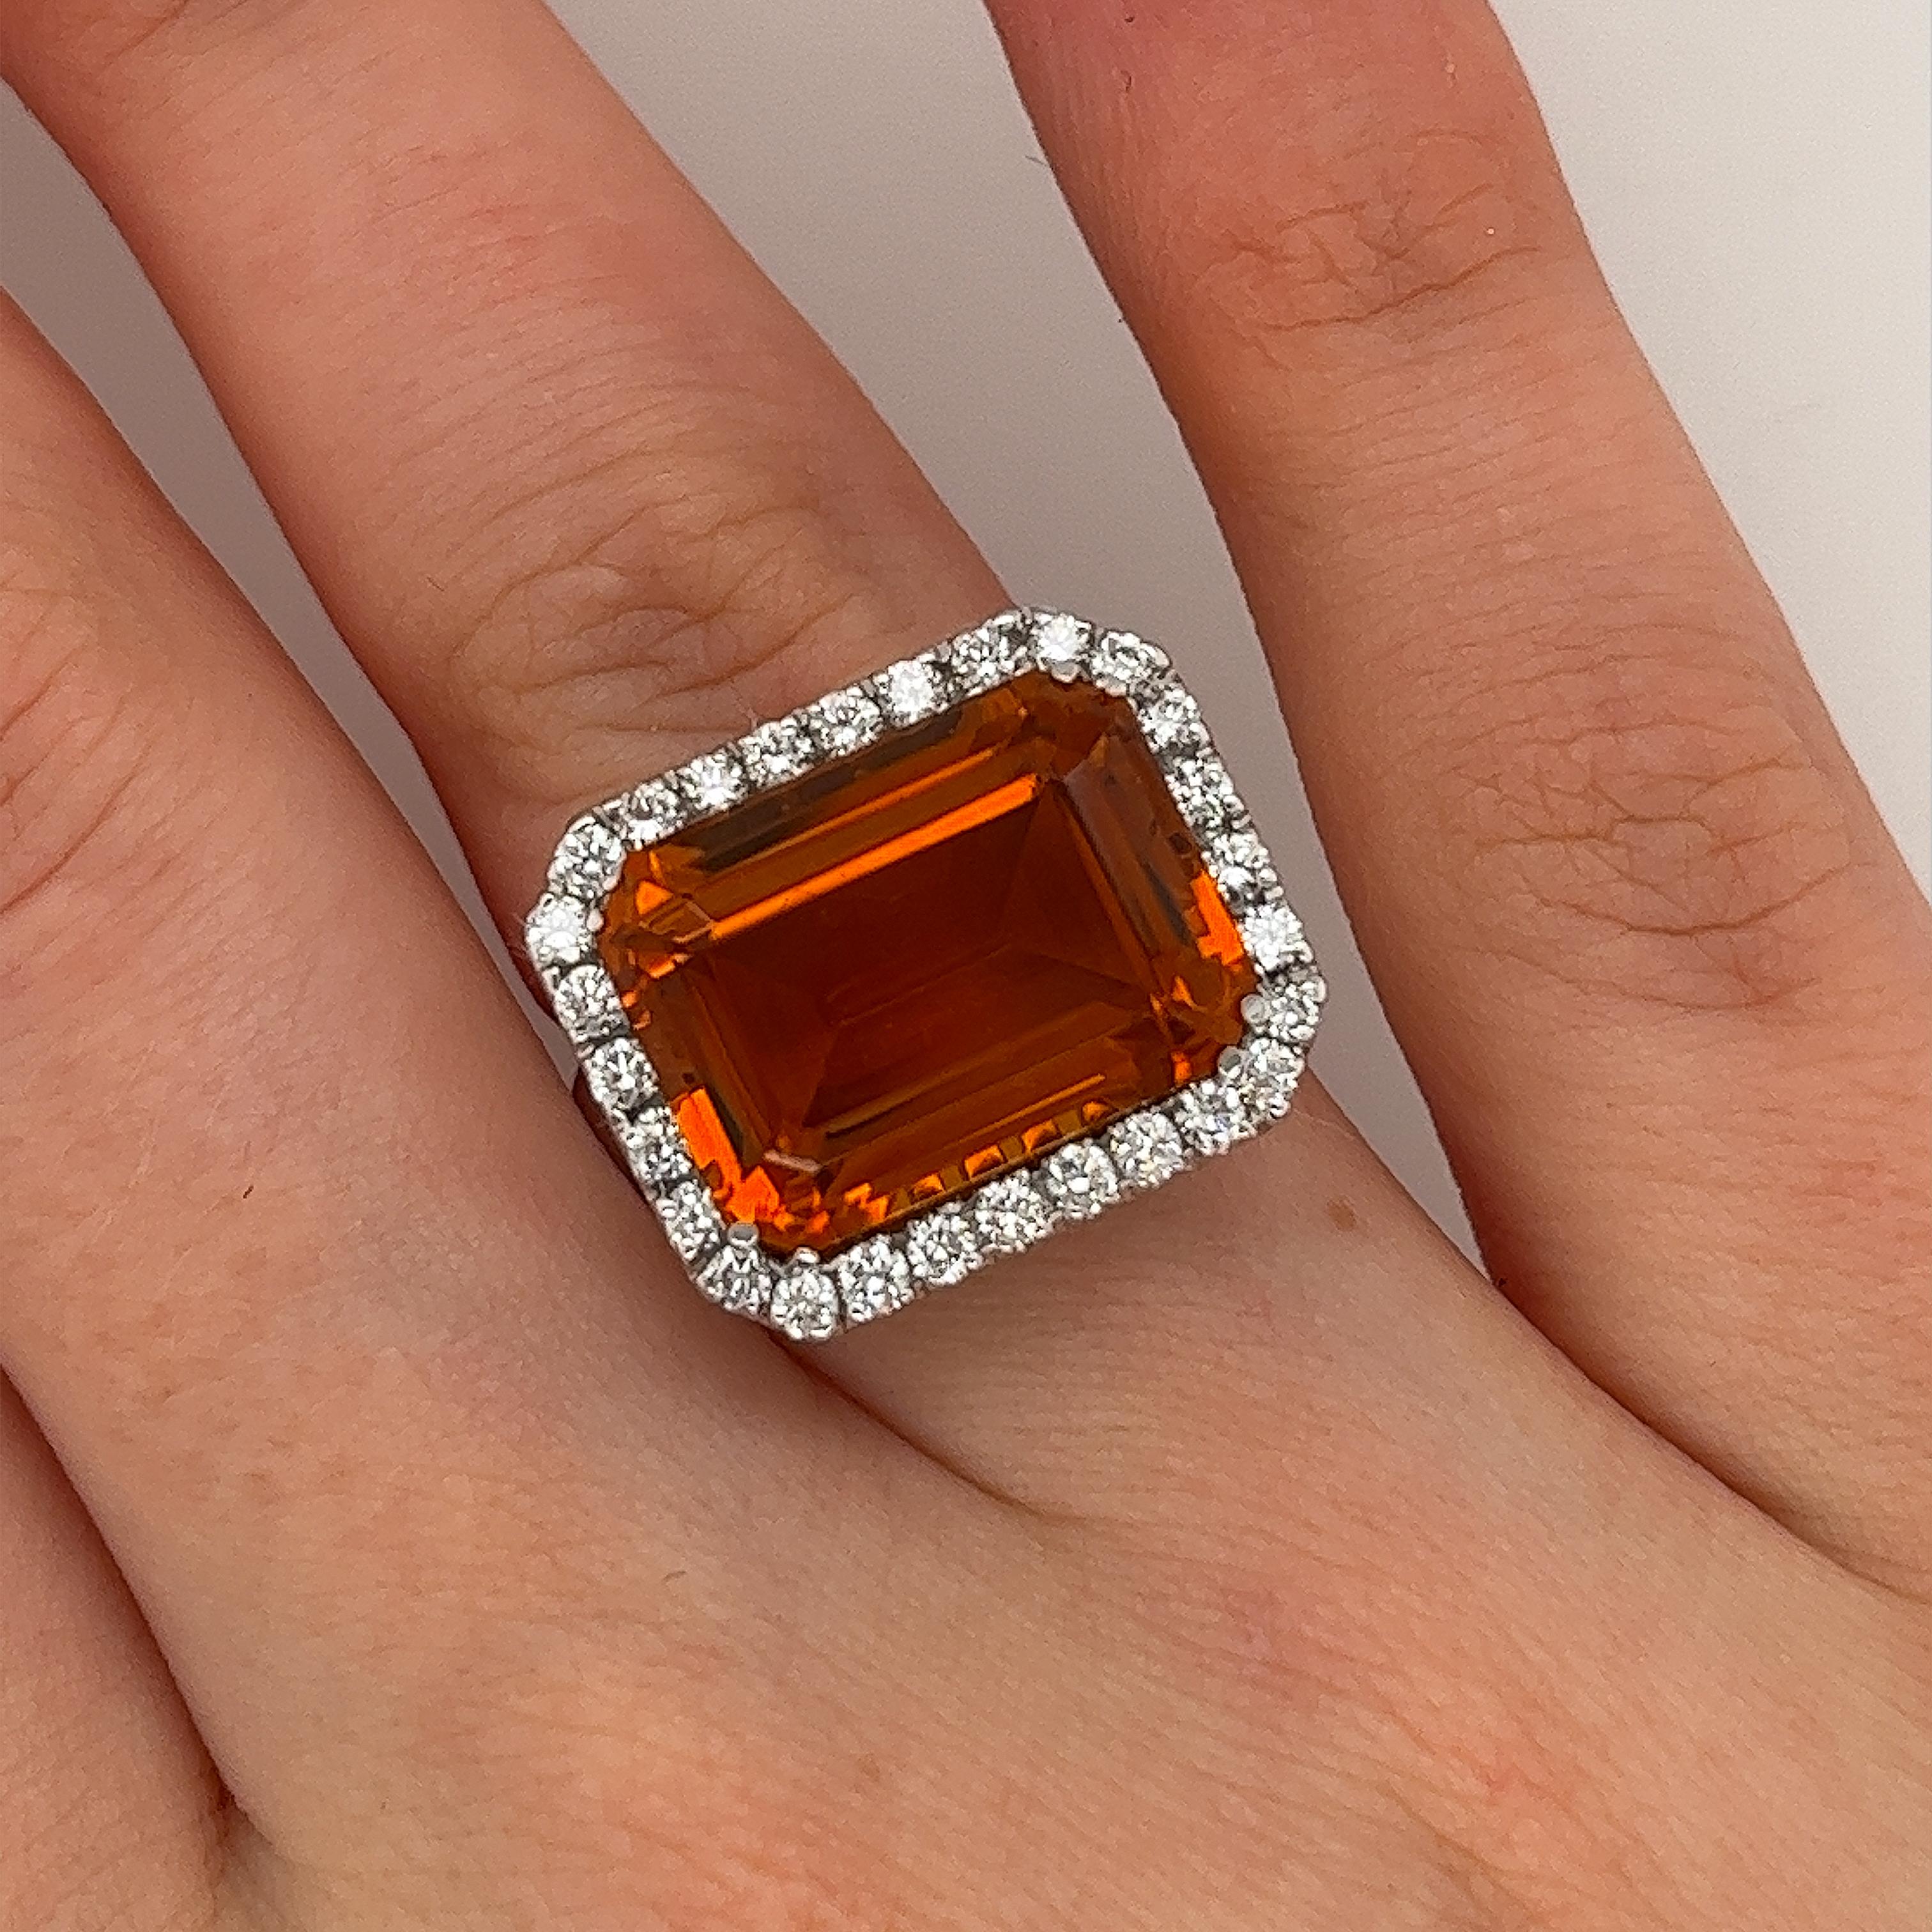 Introducing the epitome of timeless elegance - our classic Emerald Golden Citrine ring surrounded by 28 dazzling diamonds.
Total diamond weight is 0.56ct G/VSI, set in exquisite 18ct White Gold.

Total Weight: 16.79g
Ring Size: N
Width of Band: